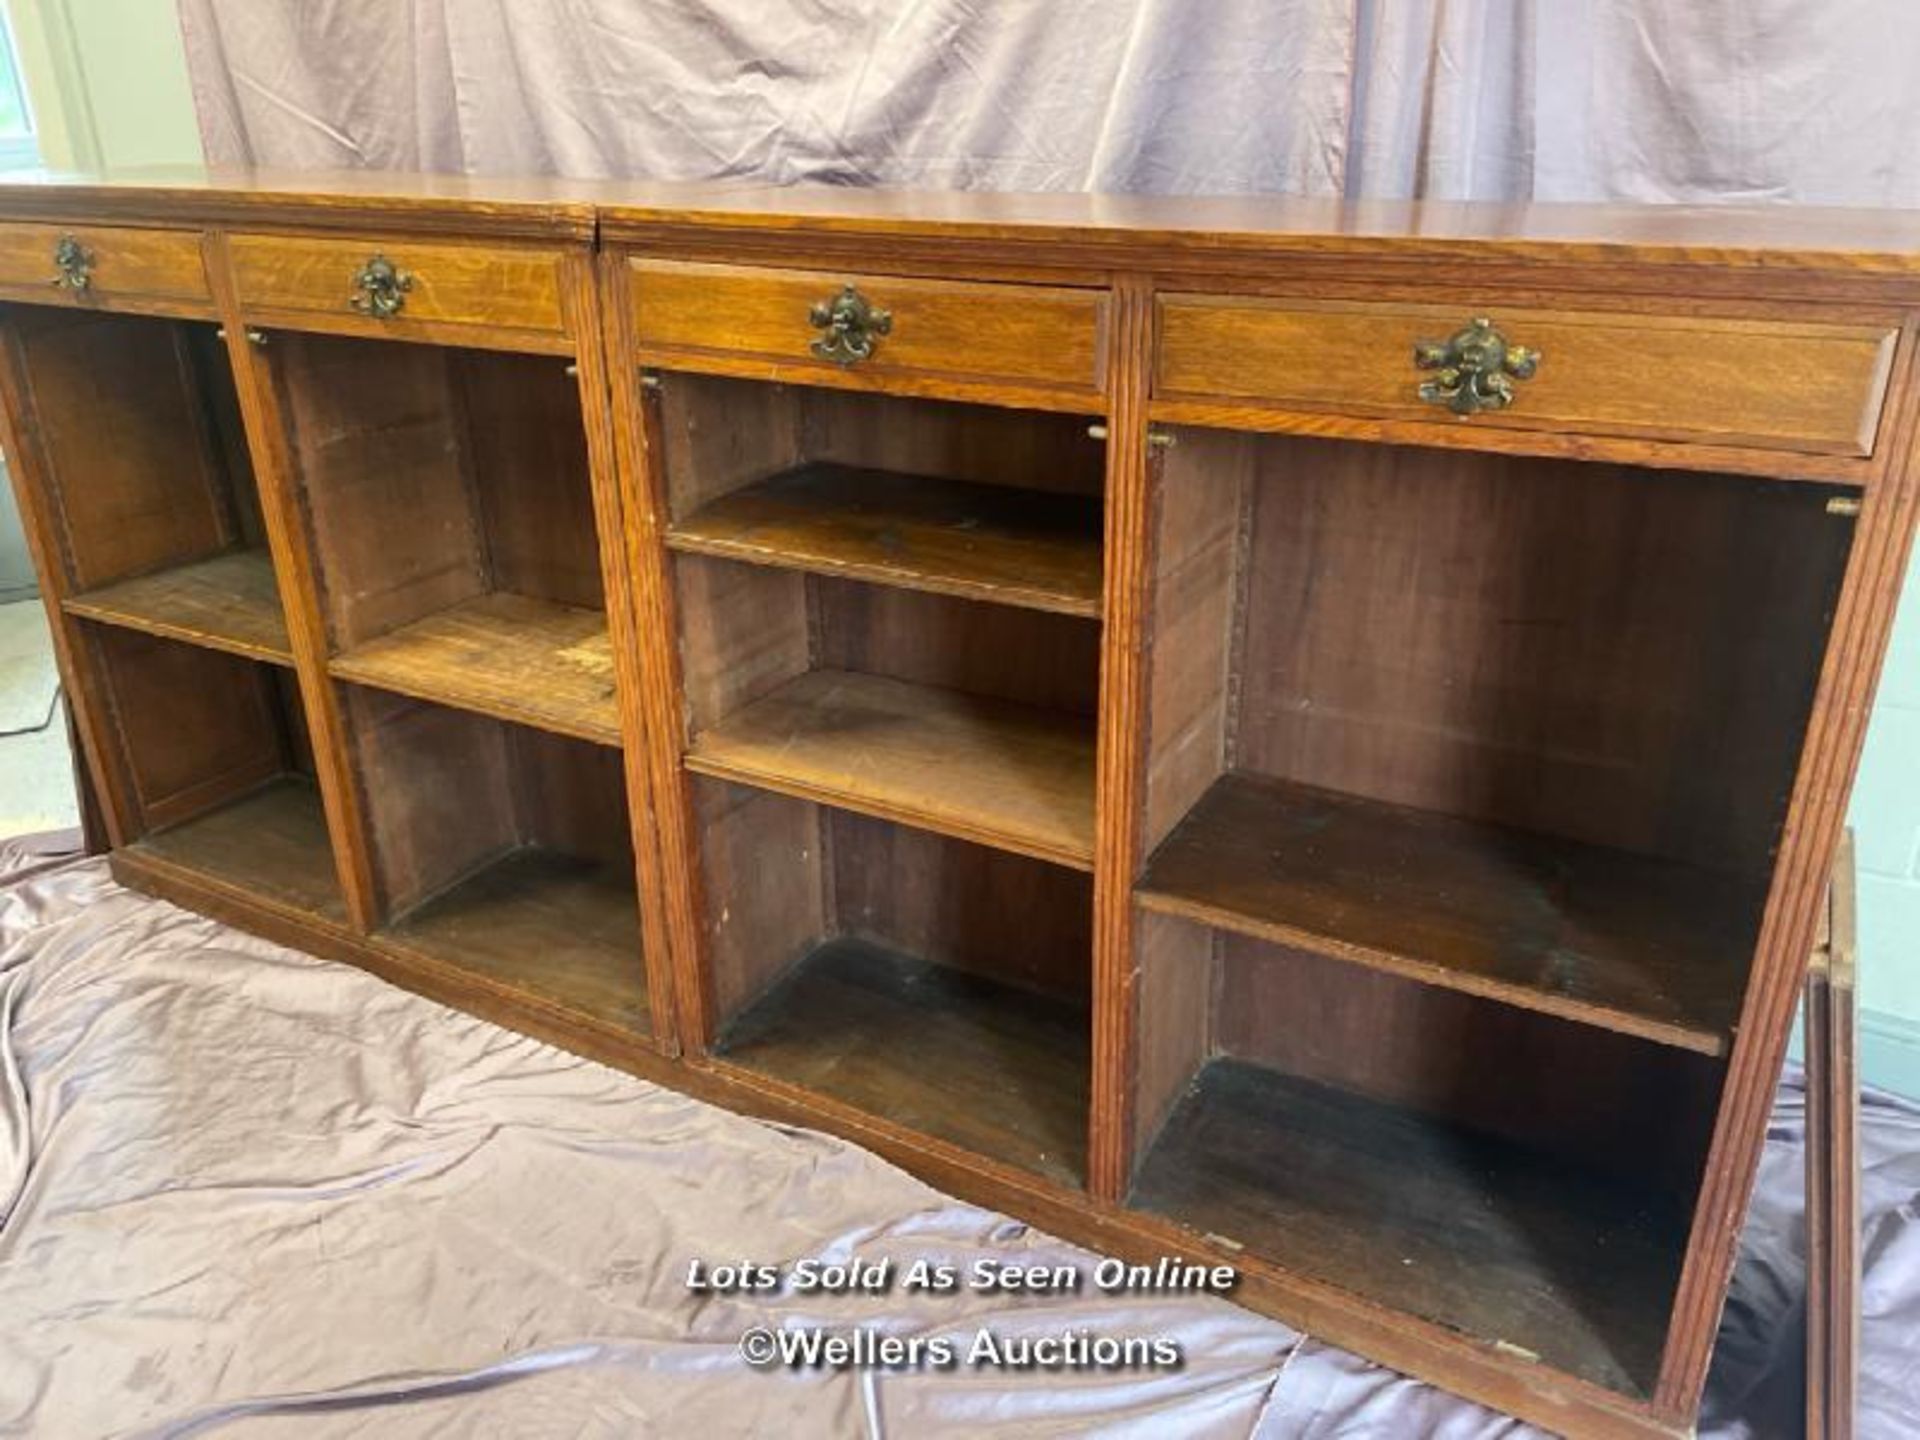 CIRCA 1900, LARGE WOODEN BOOKCASE IN TWO PARTS, WITH FOUR DRAWERS AND EIGHT ADJUSTABLE SHELVES, - Image 2 of 6